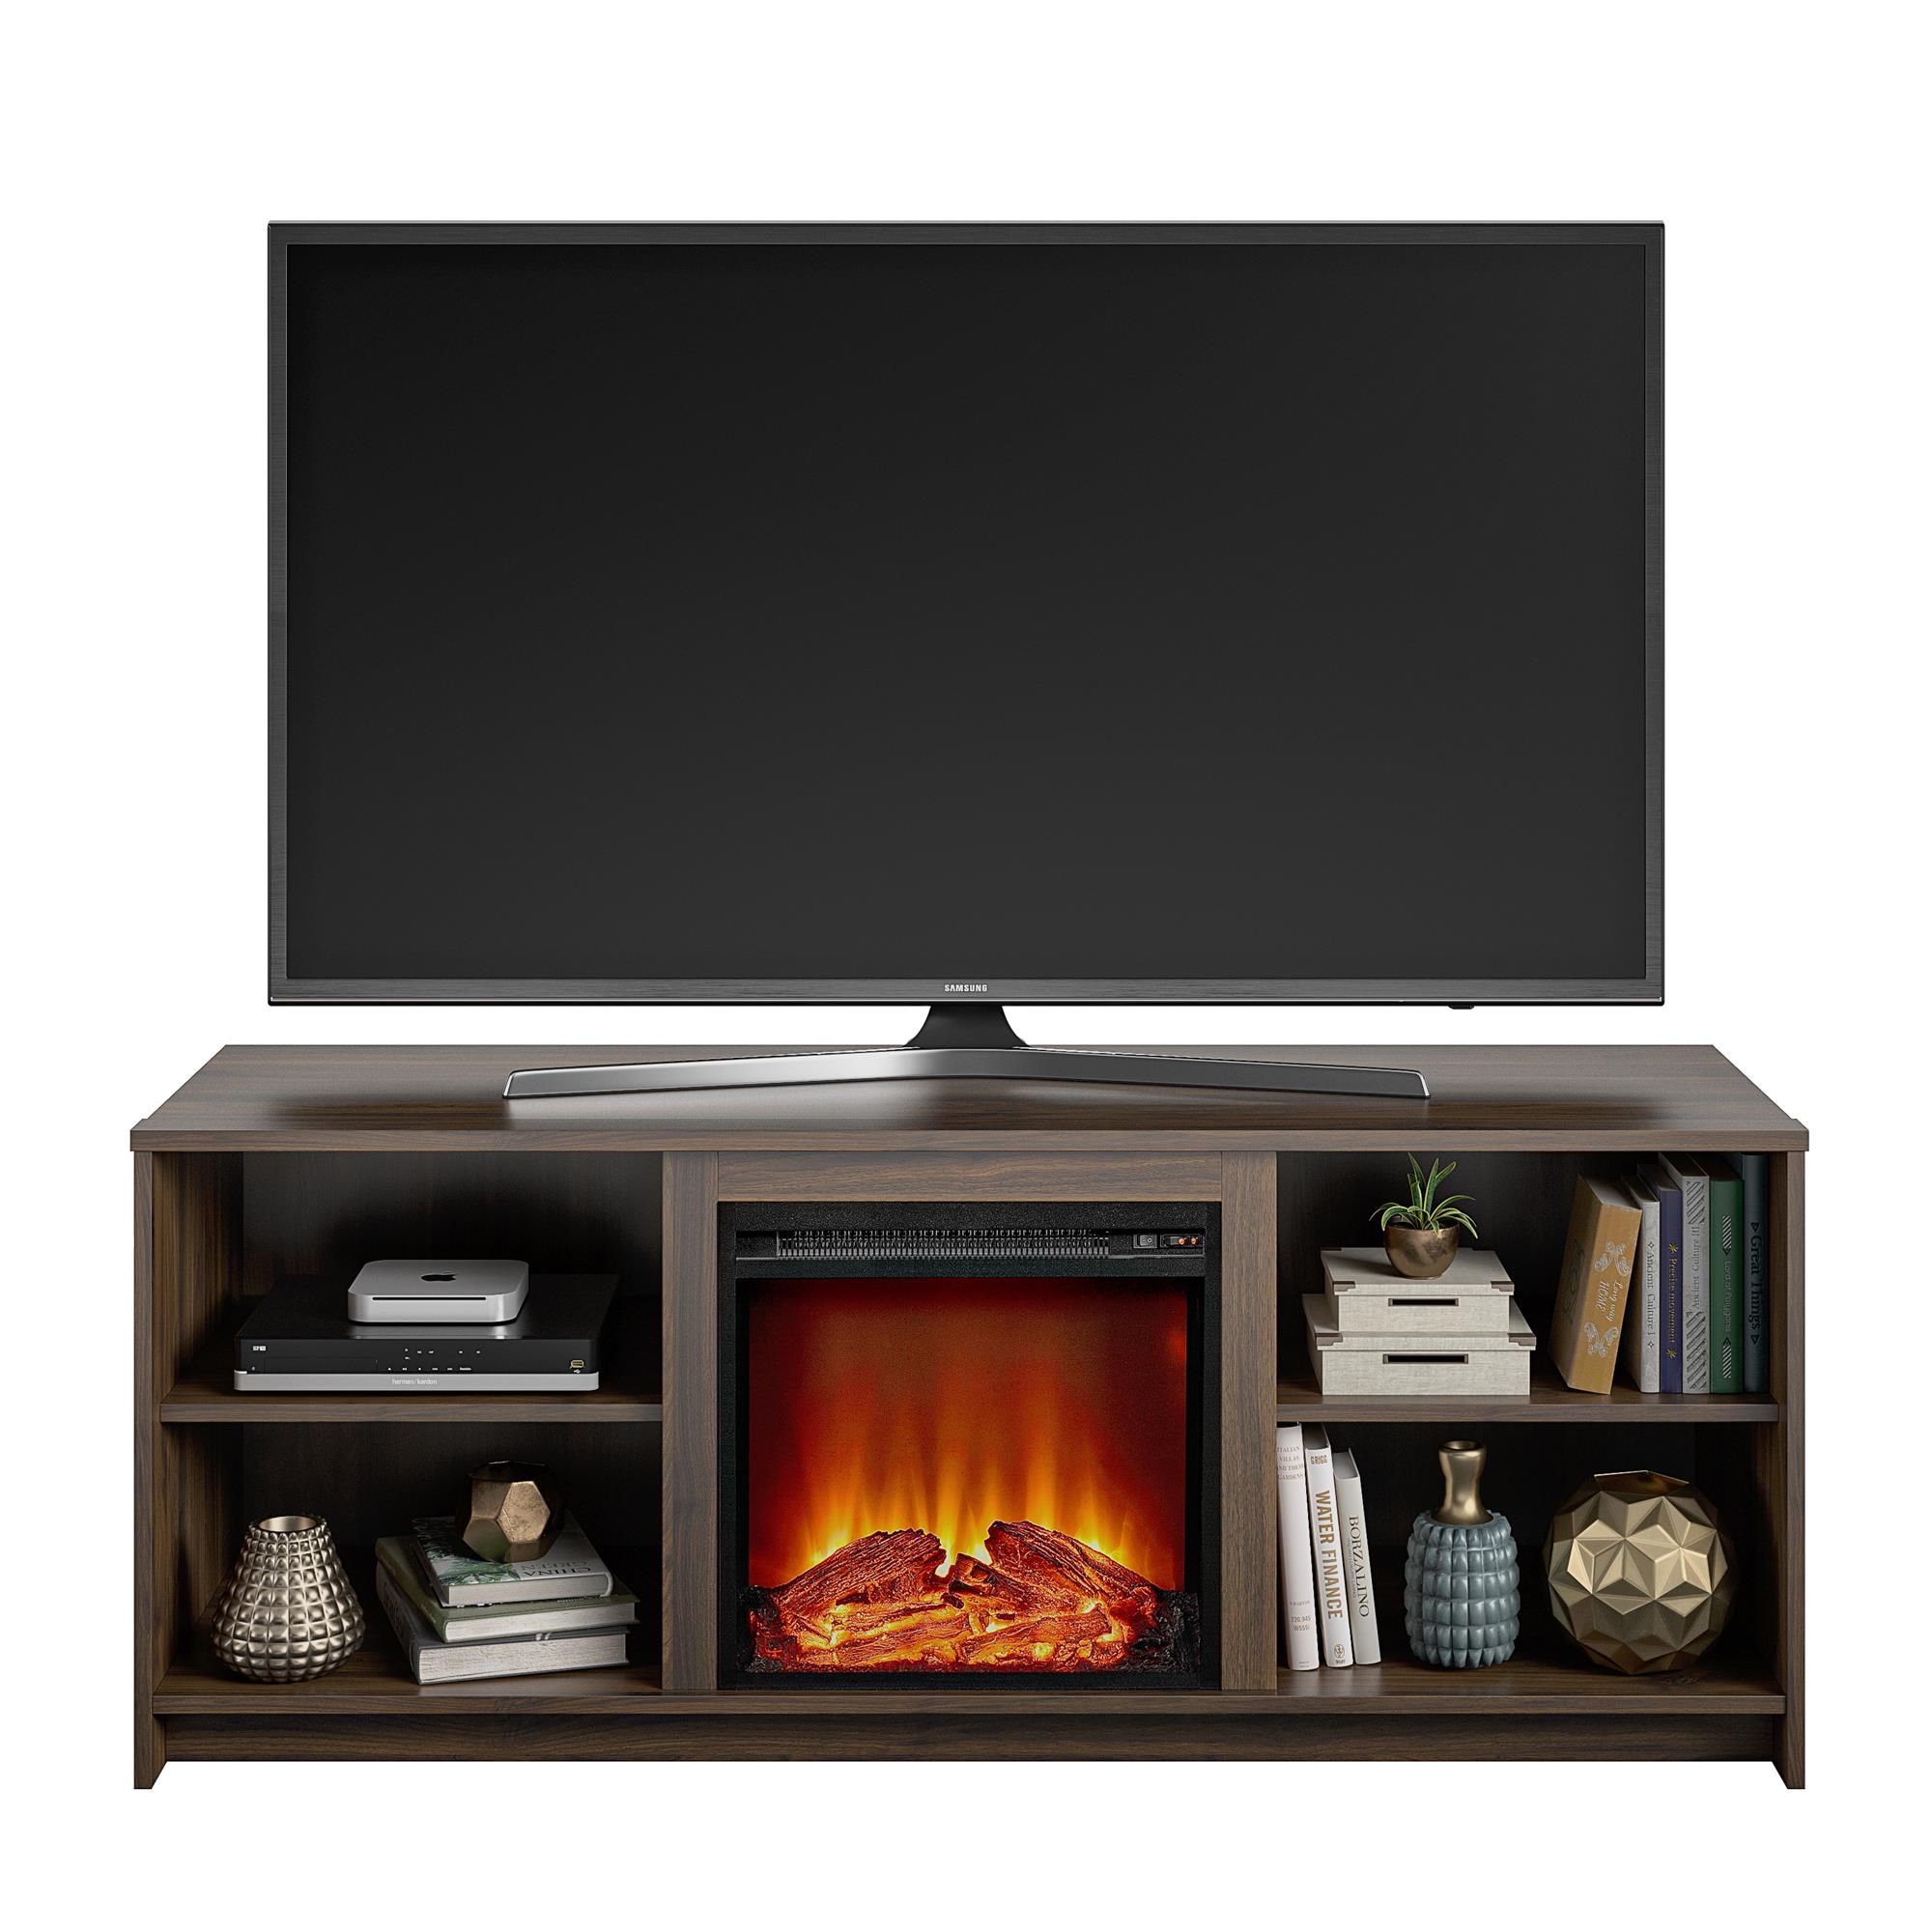 Mainstays Fireplace TV Stand for TVs up to 65", Walnut - image 3 of 11